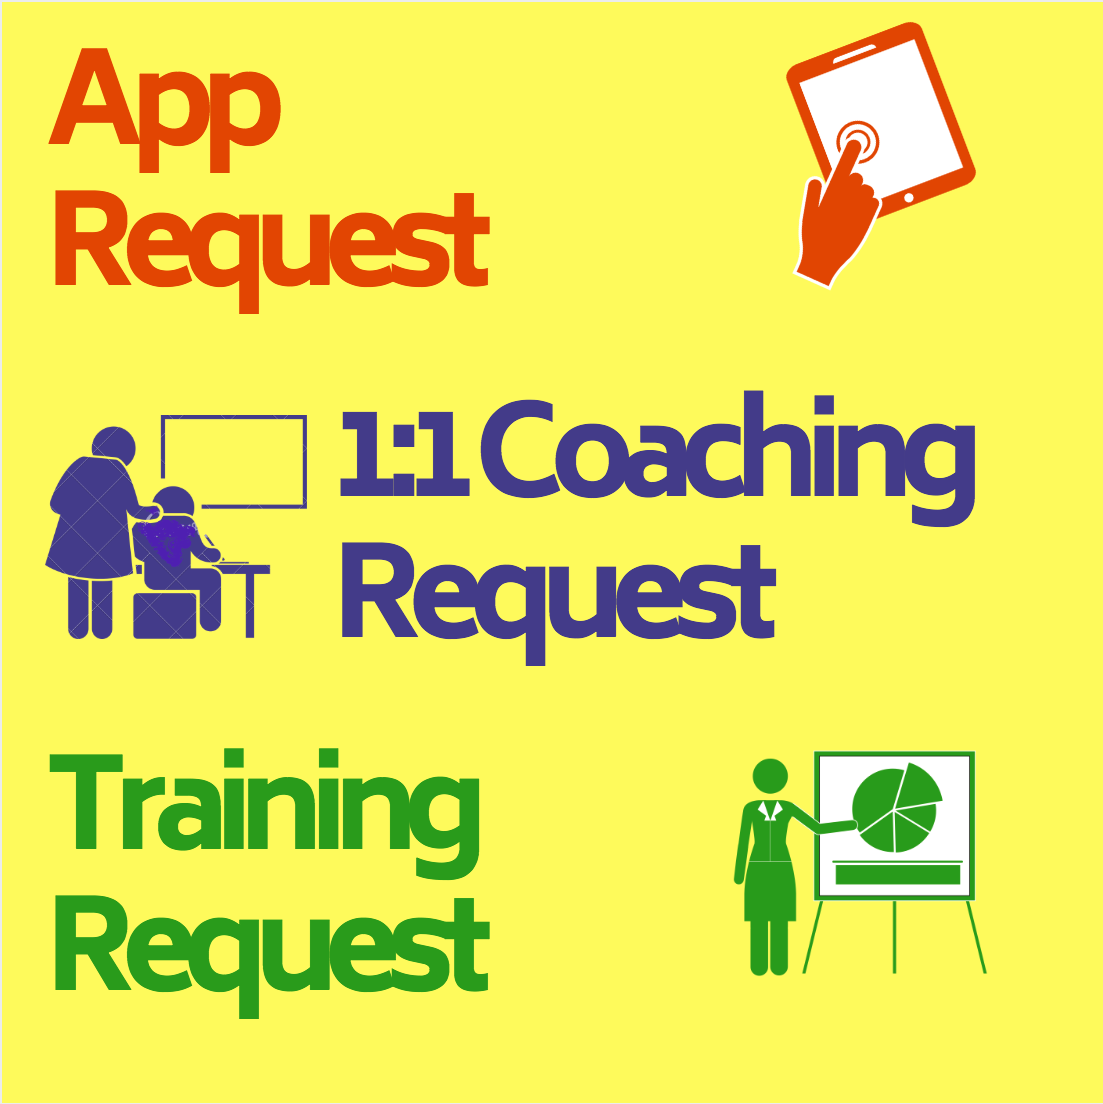 App, Coaching and Training Request Image